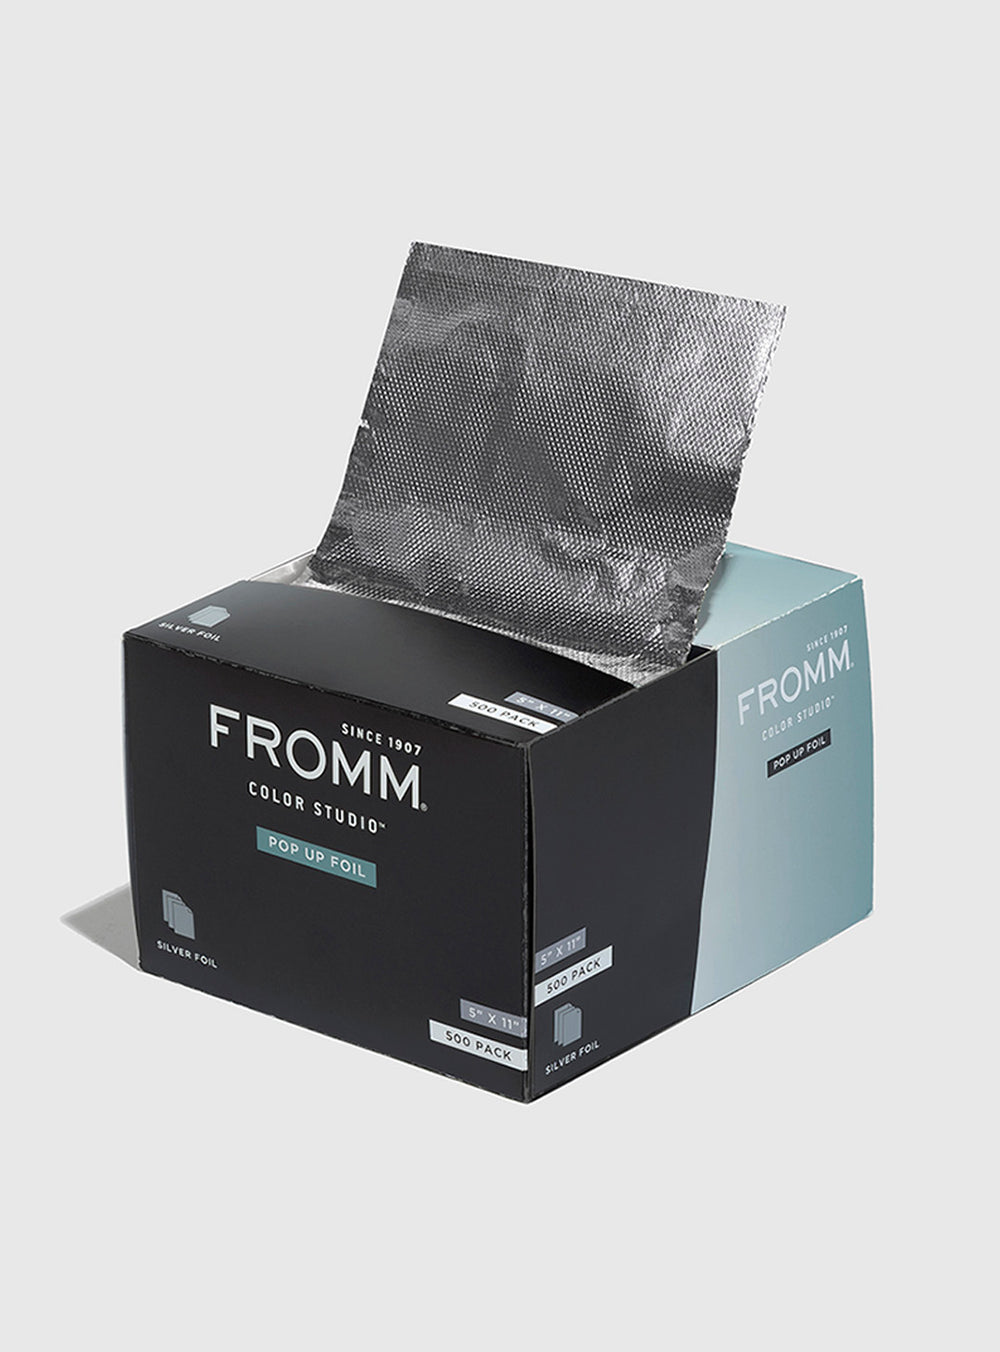 Fromm Pop Up Foil 5 in x 11 inch 500 CountHair Color AccessoriesFROMMColor: Silver